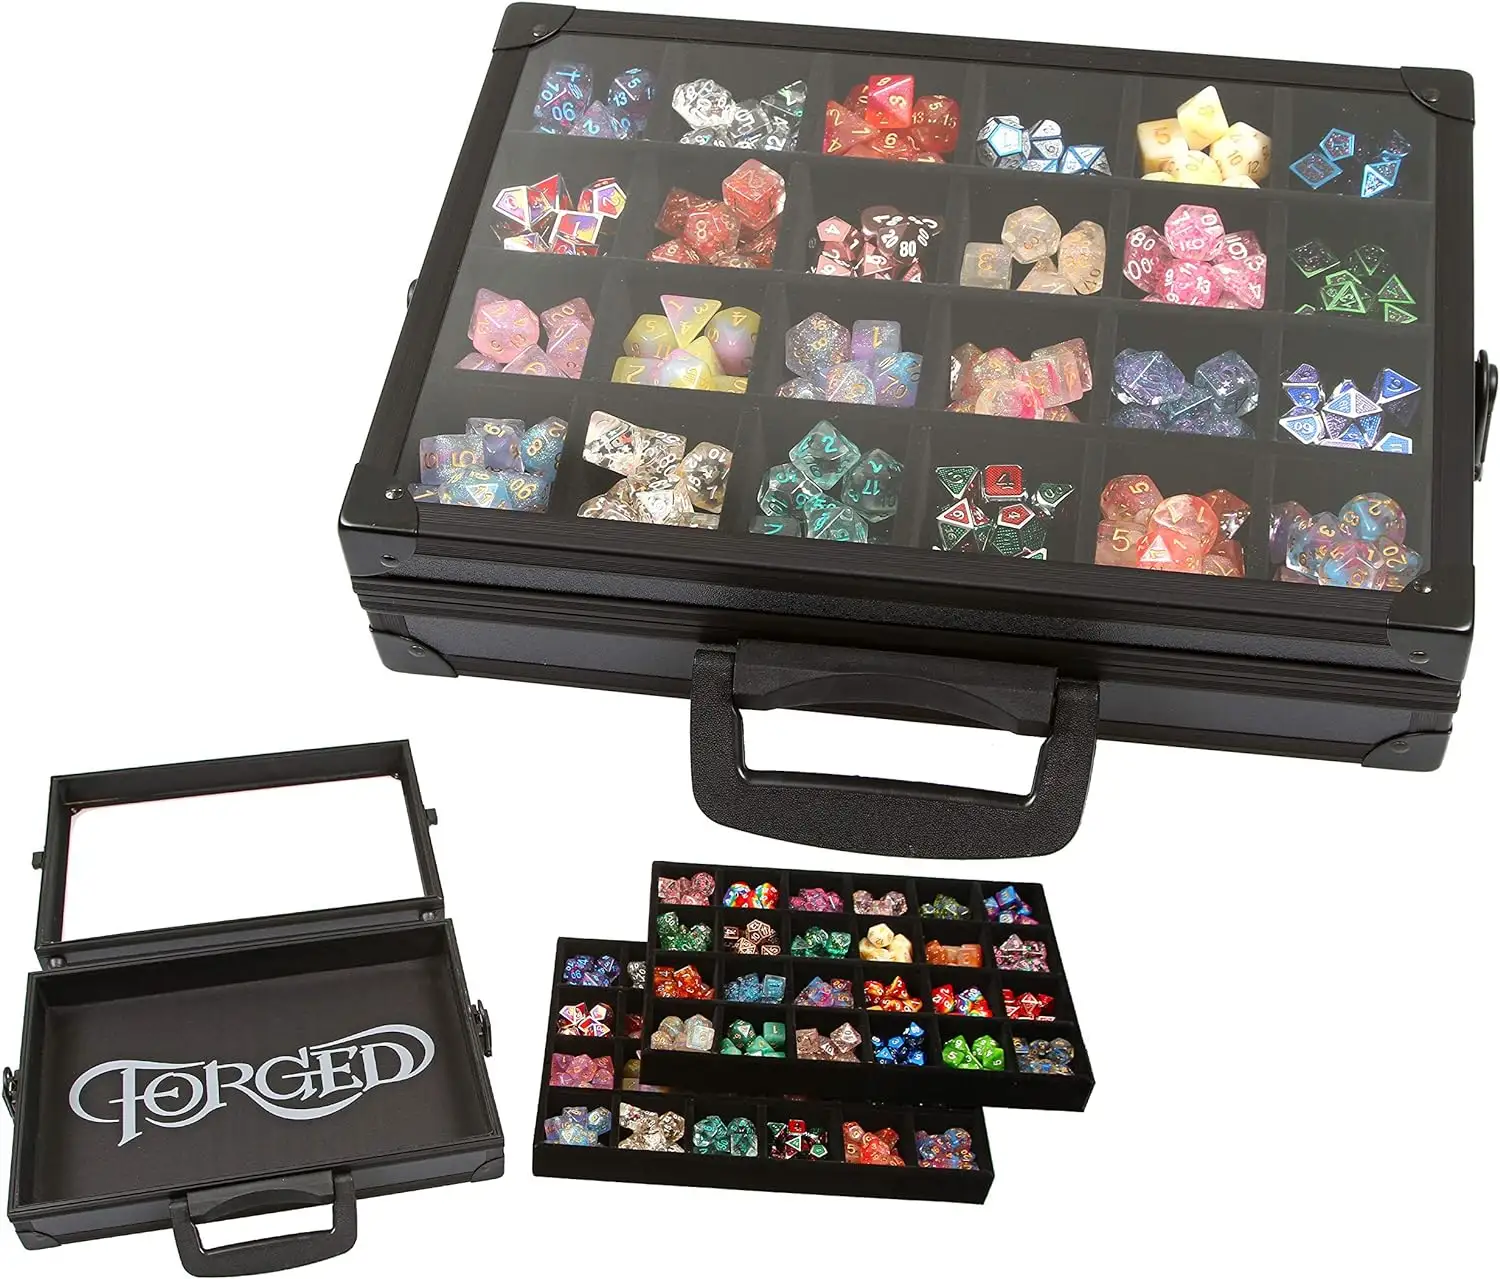 Dice display case with 2 removable divided dice trays holds up to 480 dice sets storage aluminum case with top clear window